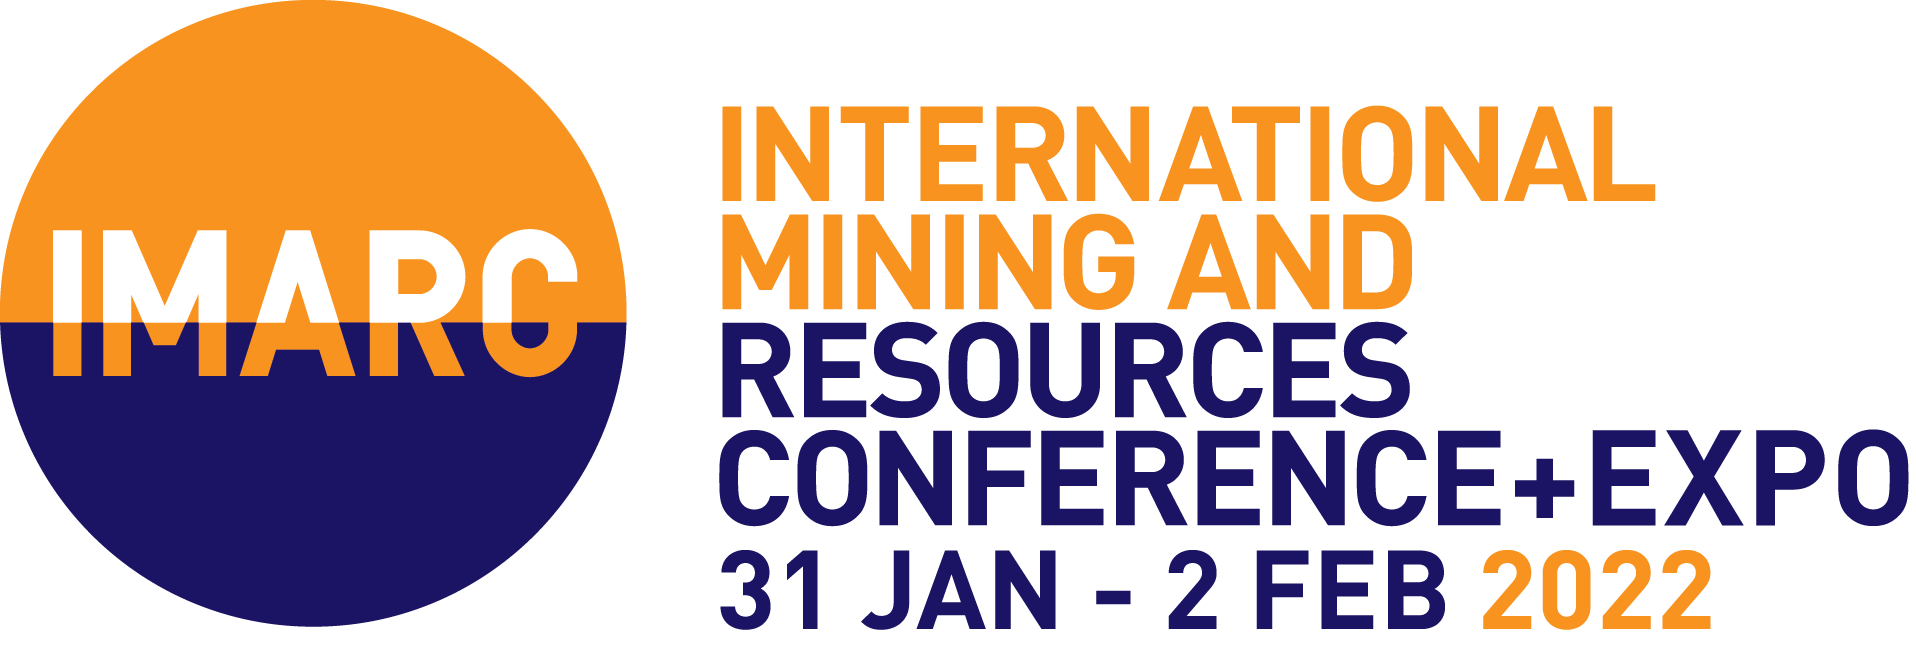 International Mining and Resources Conference (IMARC) organized by Beacon Events